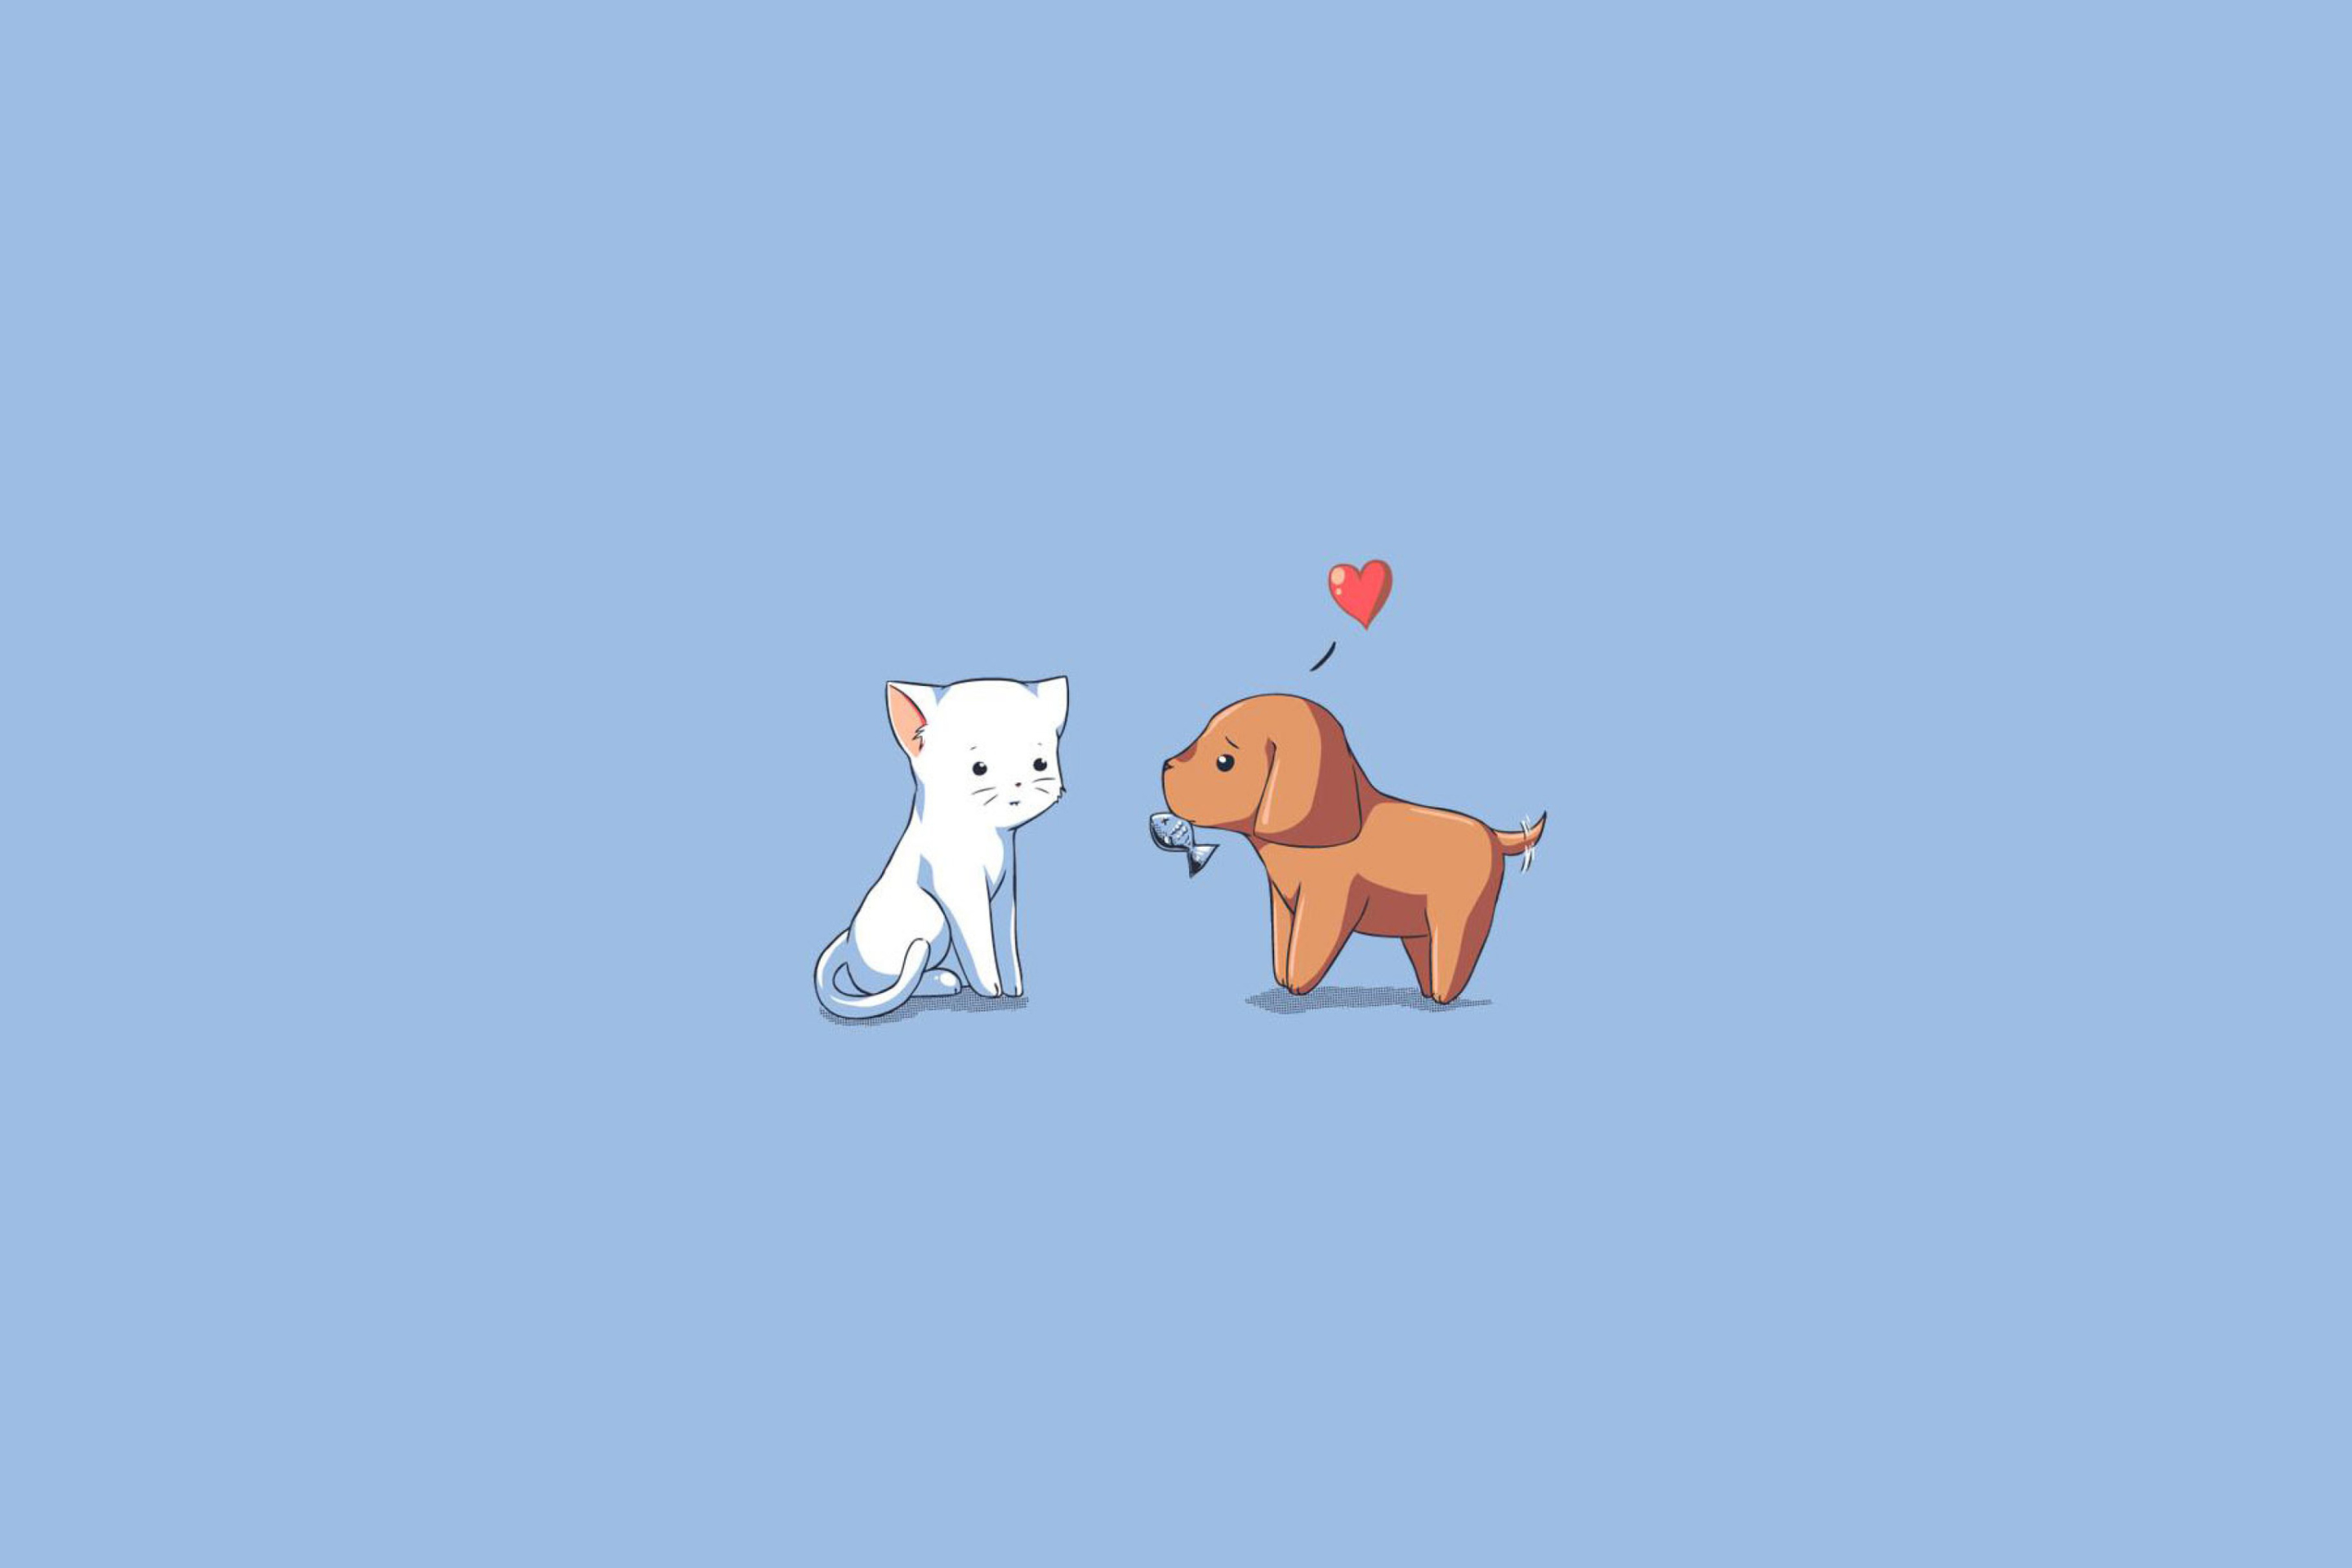 Dog And Cat On Blue Background wallpaper 2880x1920